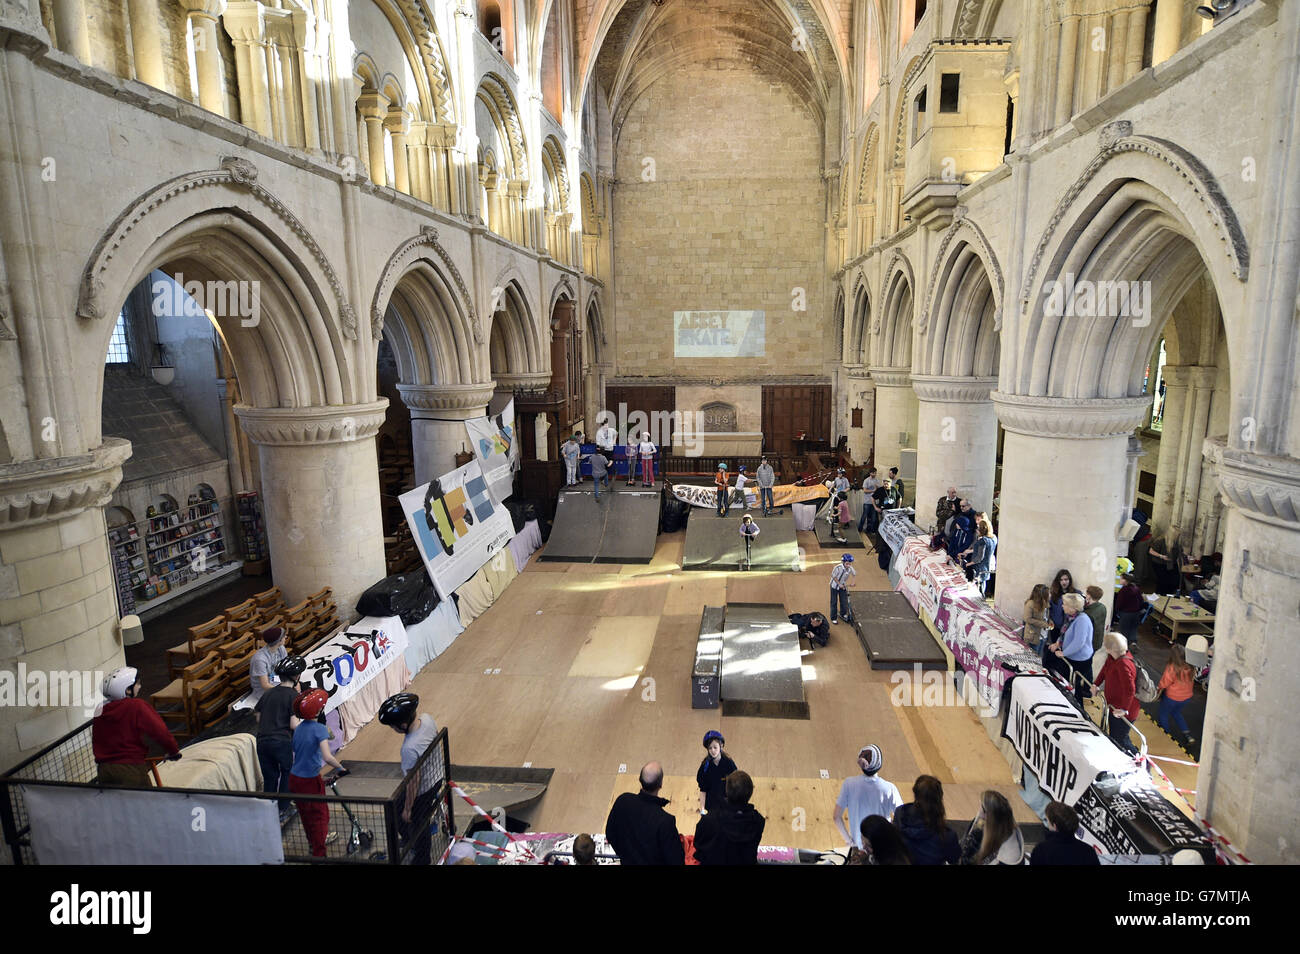 Skaters and scooter enthusiasts enjoy a temporary skate park that has been set up inside Malmesbury Abbey, Wiltshire, as the annual event sees skaters come inside the 12v Abbey to pull tricks and ride over jumps and ramps. Stock Photo